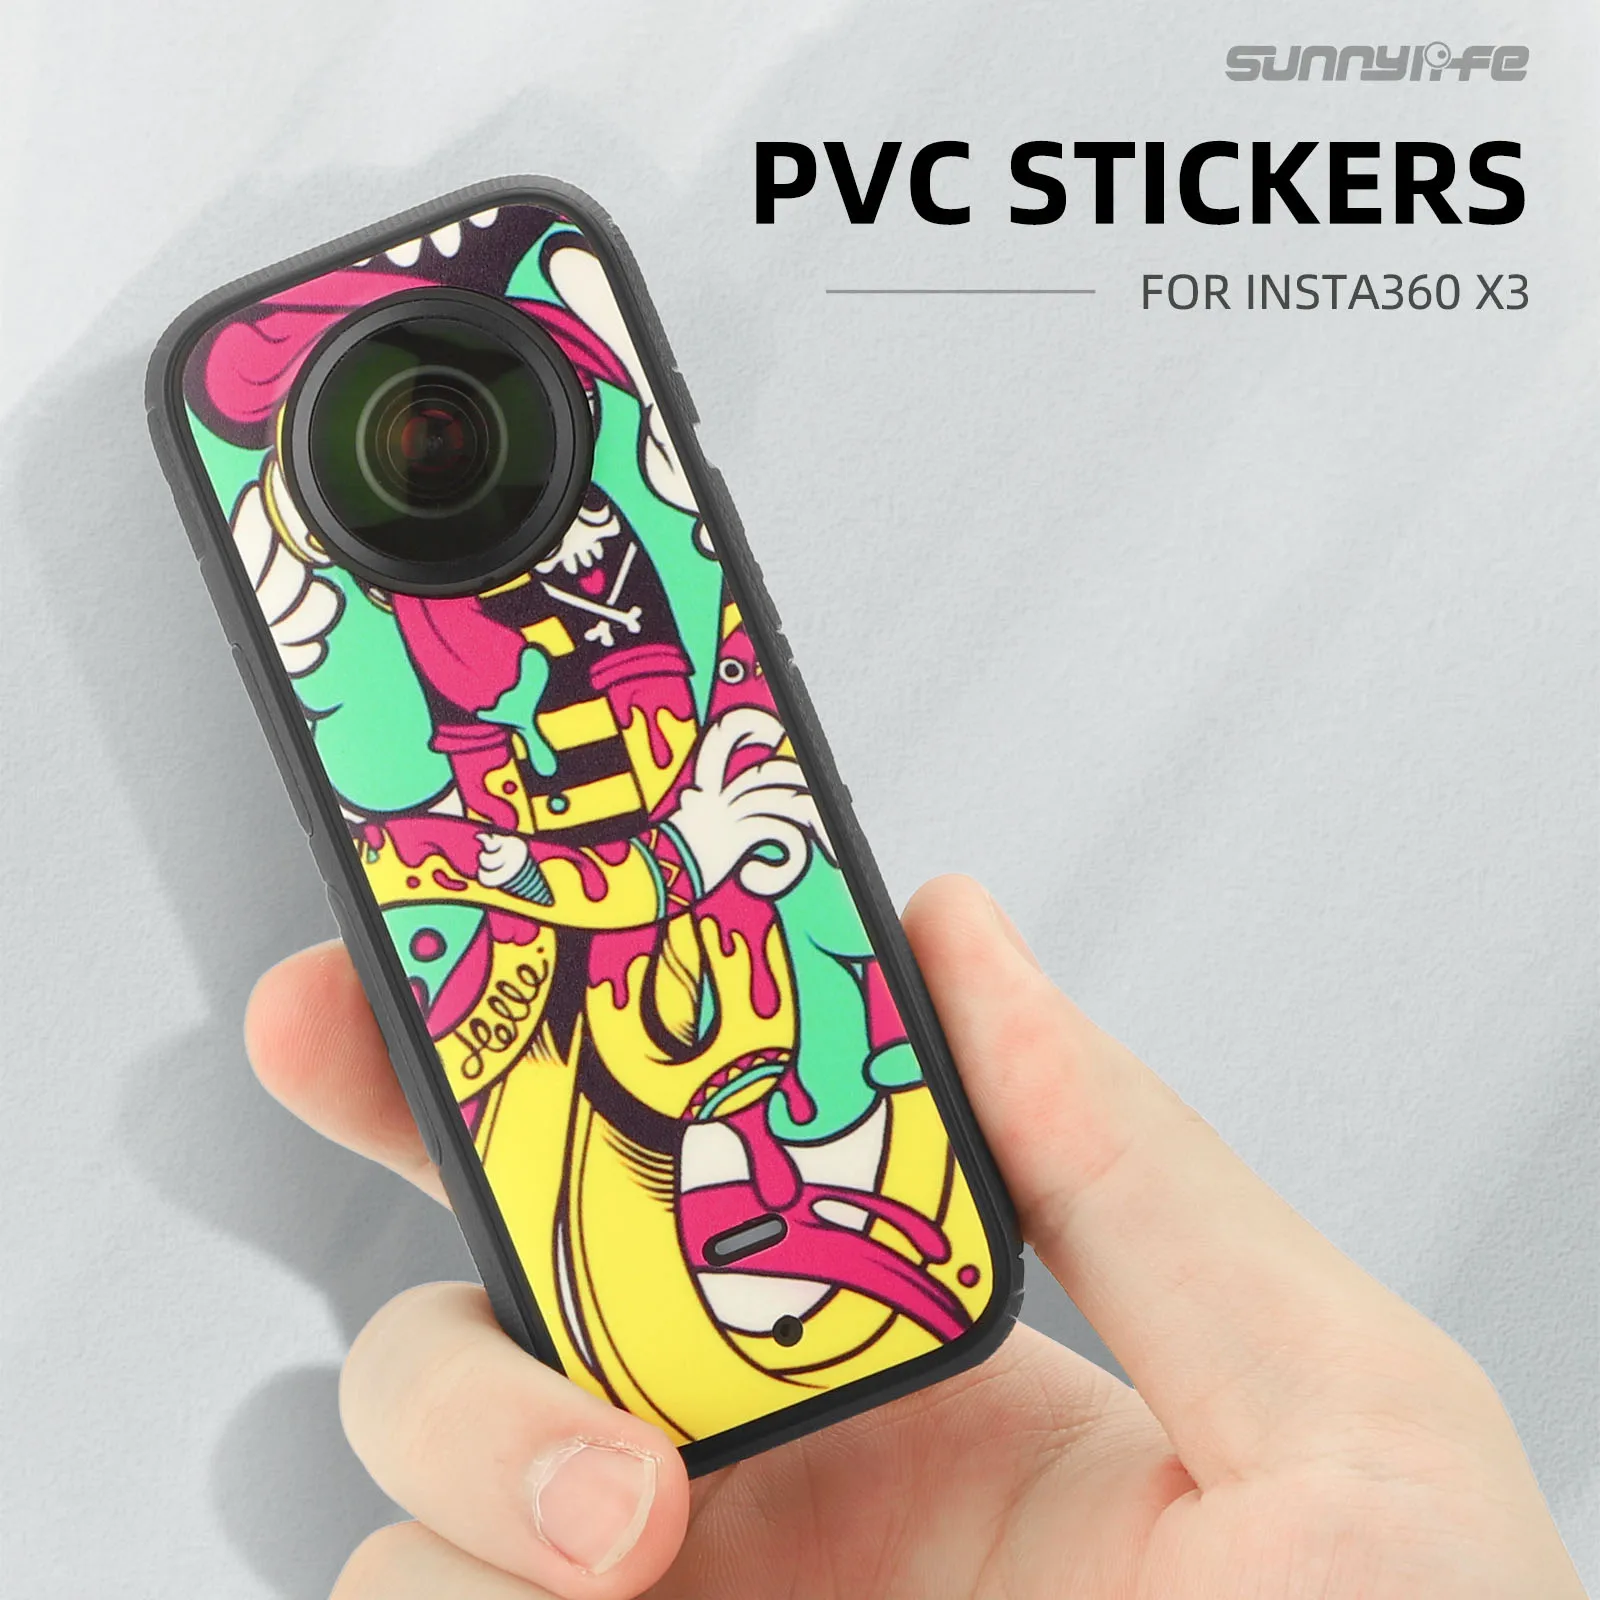 For Insta360 X3 Camera PVC Stickers Protective Film Waterproof Scratch-proof Decals Removable Skin for Insta 360 X3 Accessories